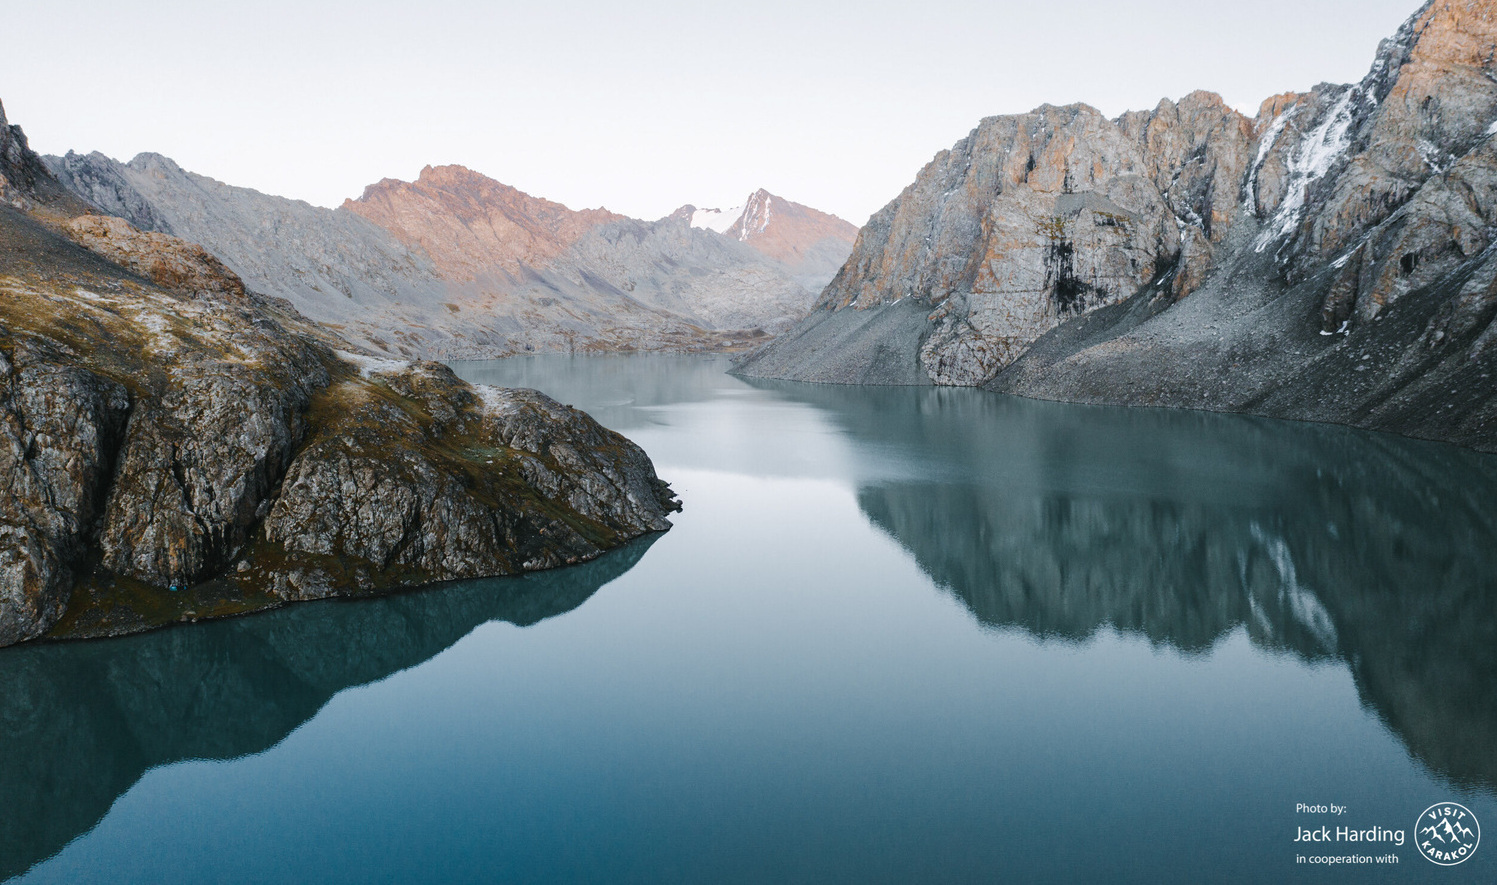 The magical Ala-Kul lake in Karakol. One of our sunrise spots during the trip. Photo by Jack Harding